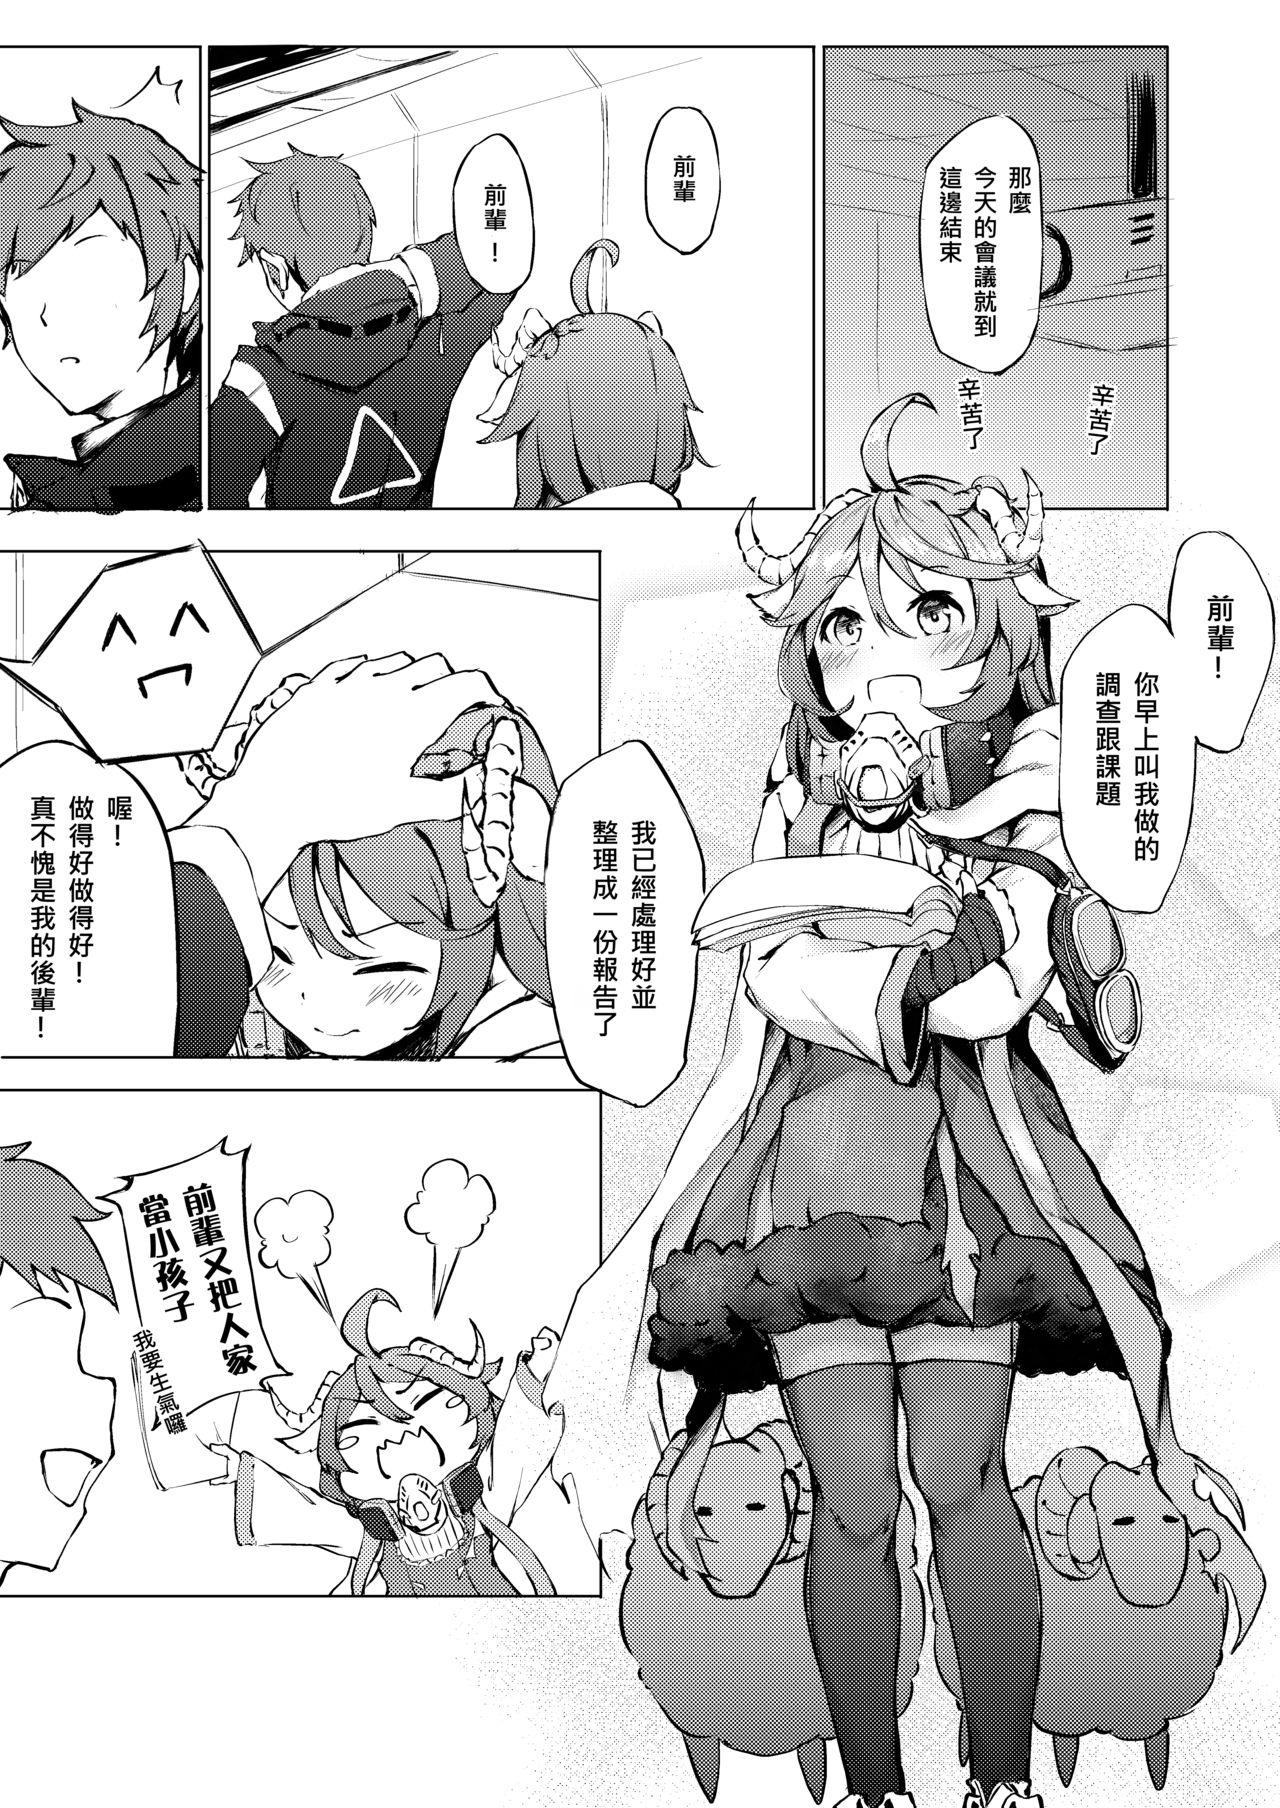 Mexicana 不存在的聲音 | The Nonexistence Voice - Arknights Interracial Sex - Page 5